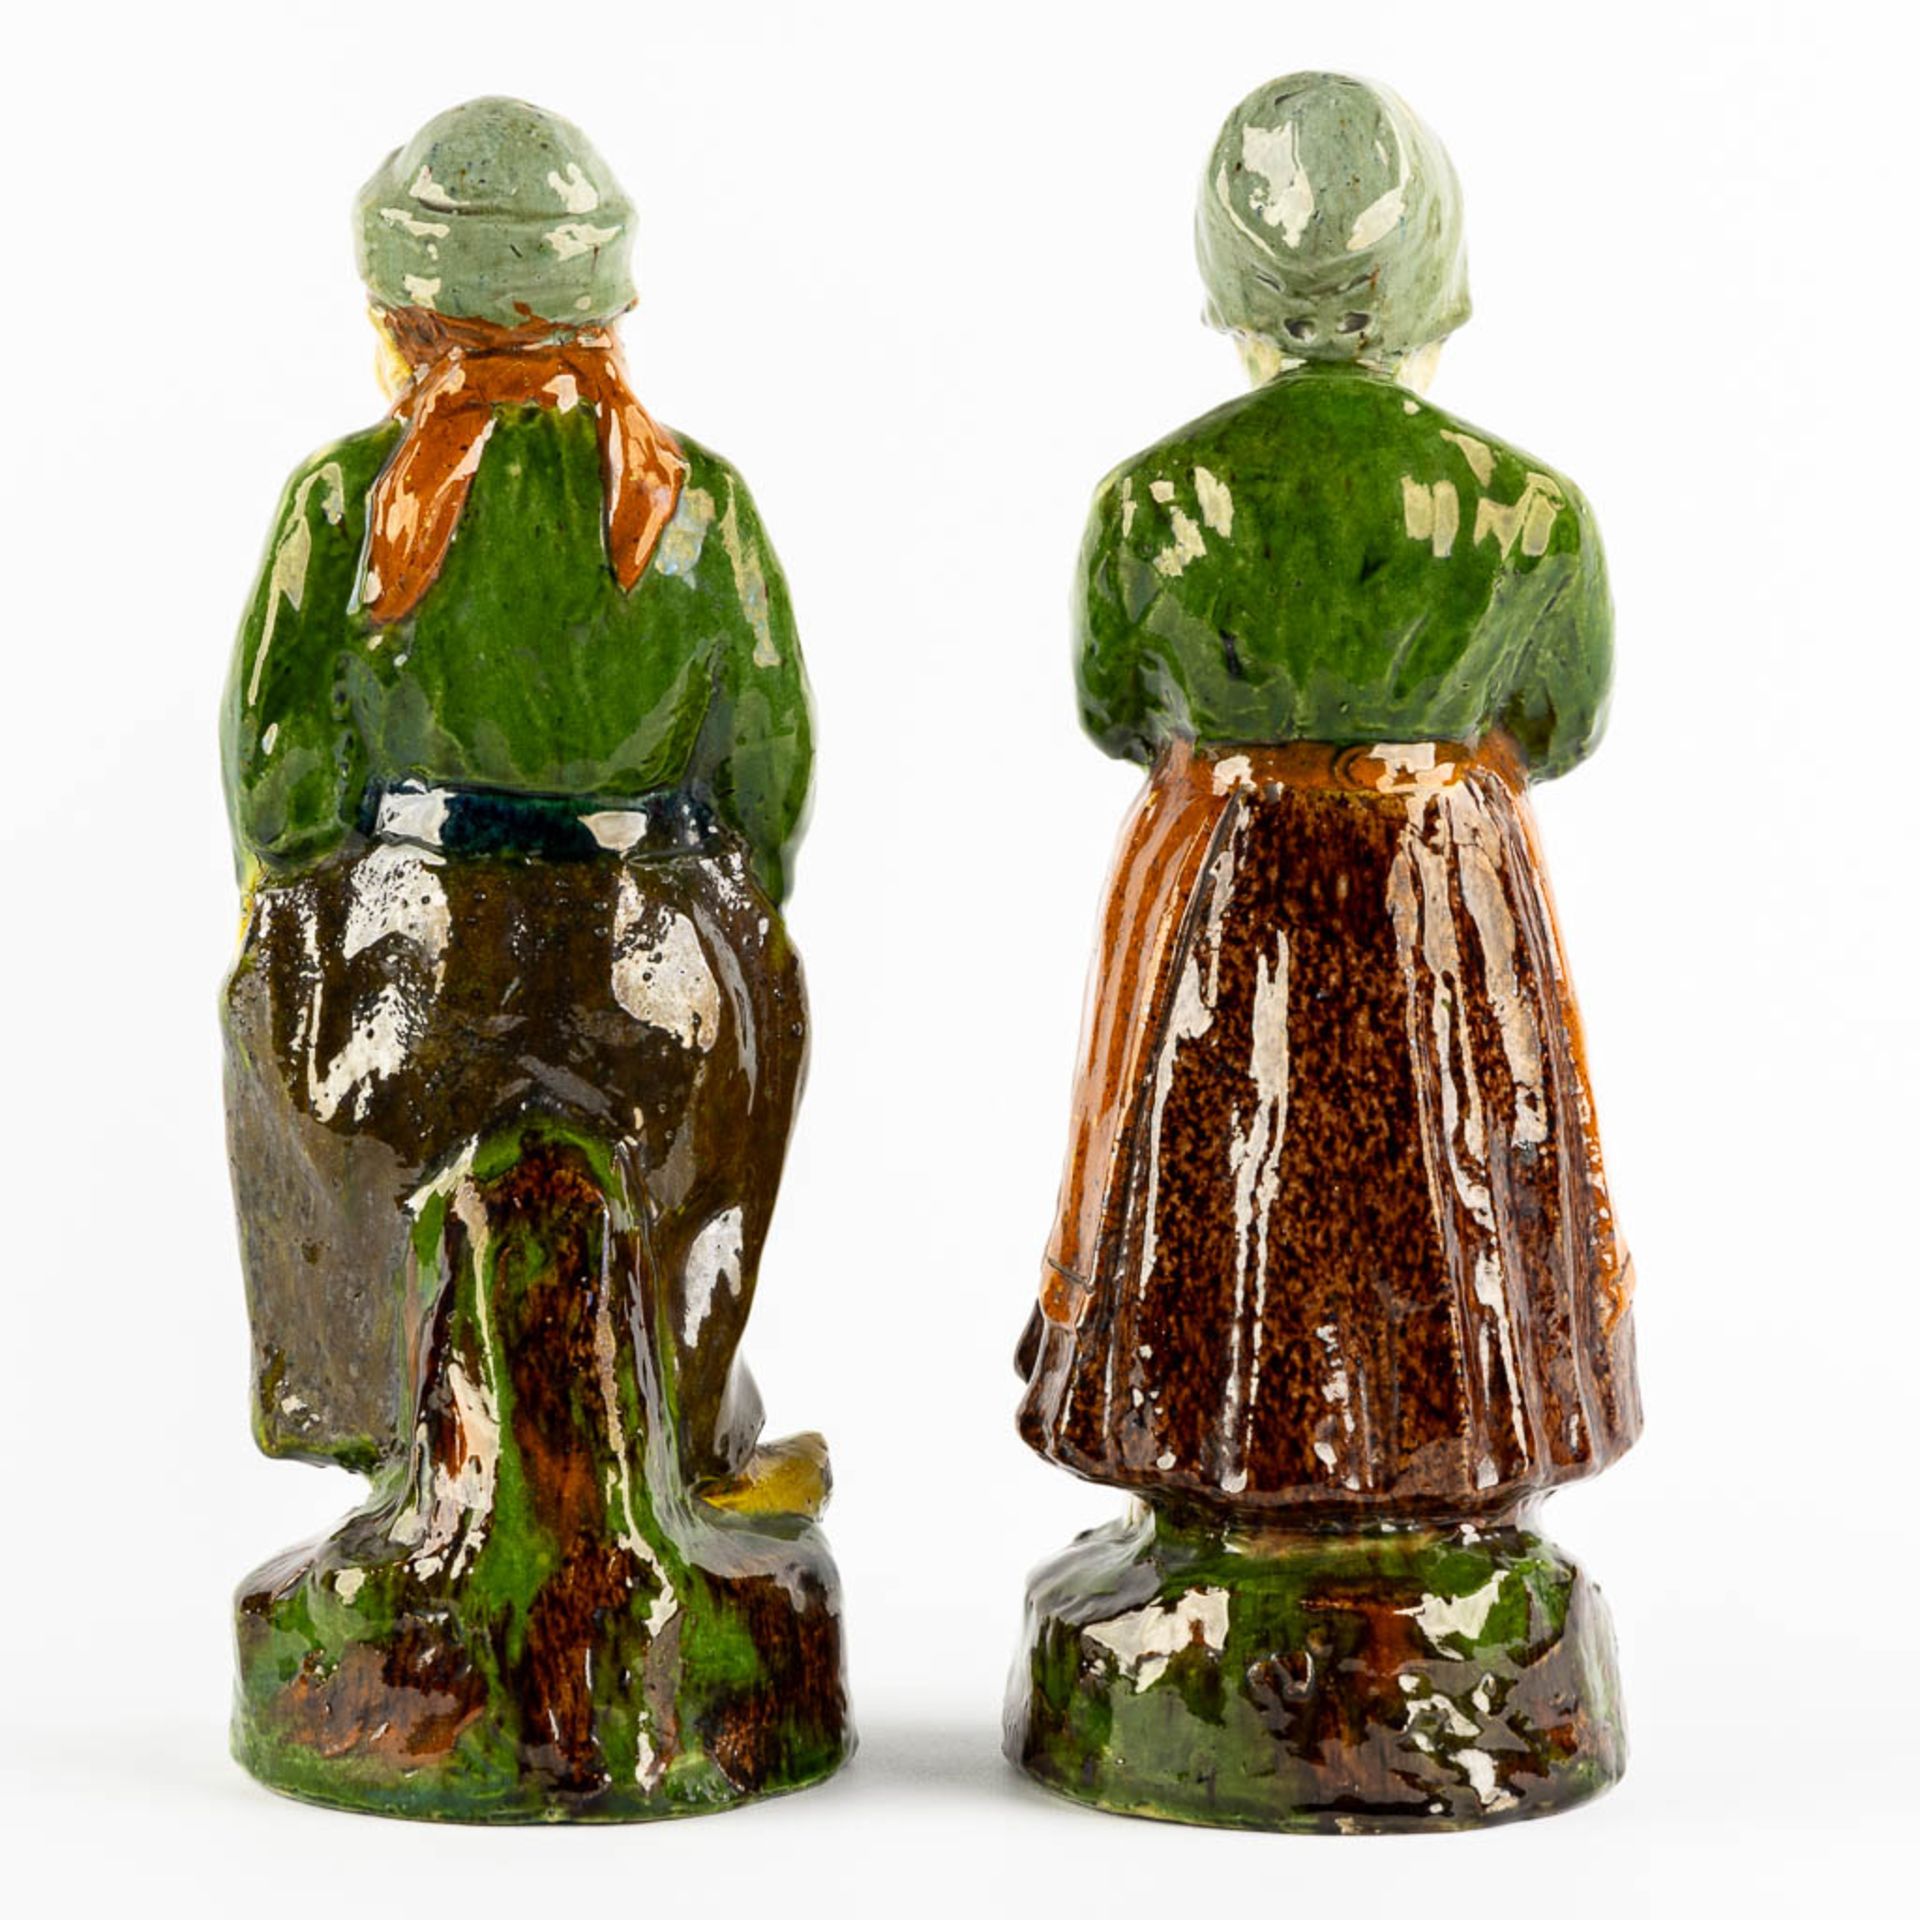 Figurine of a Man and Woman, Flemish Earthenware, possibly Caessens. Circa 1900. (H:32 x D:12 cm) - Image 5 of 9